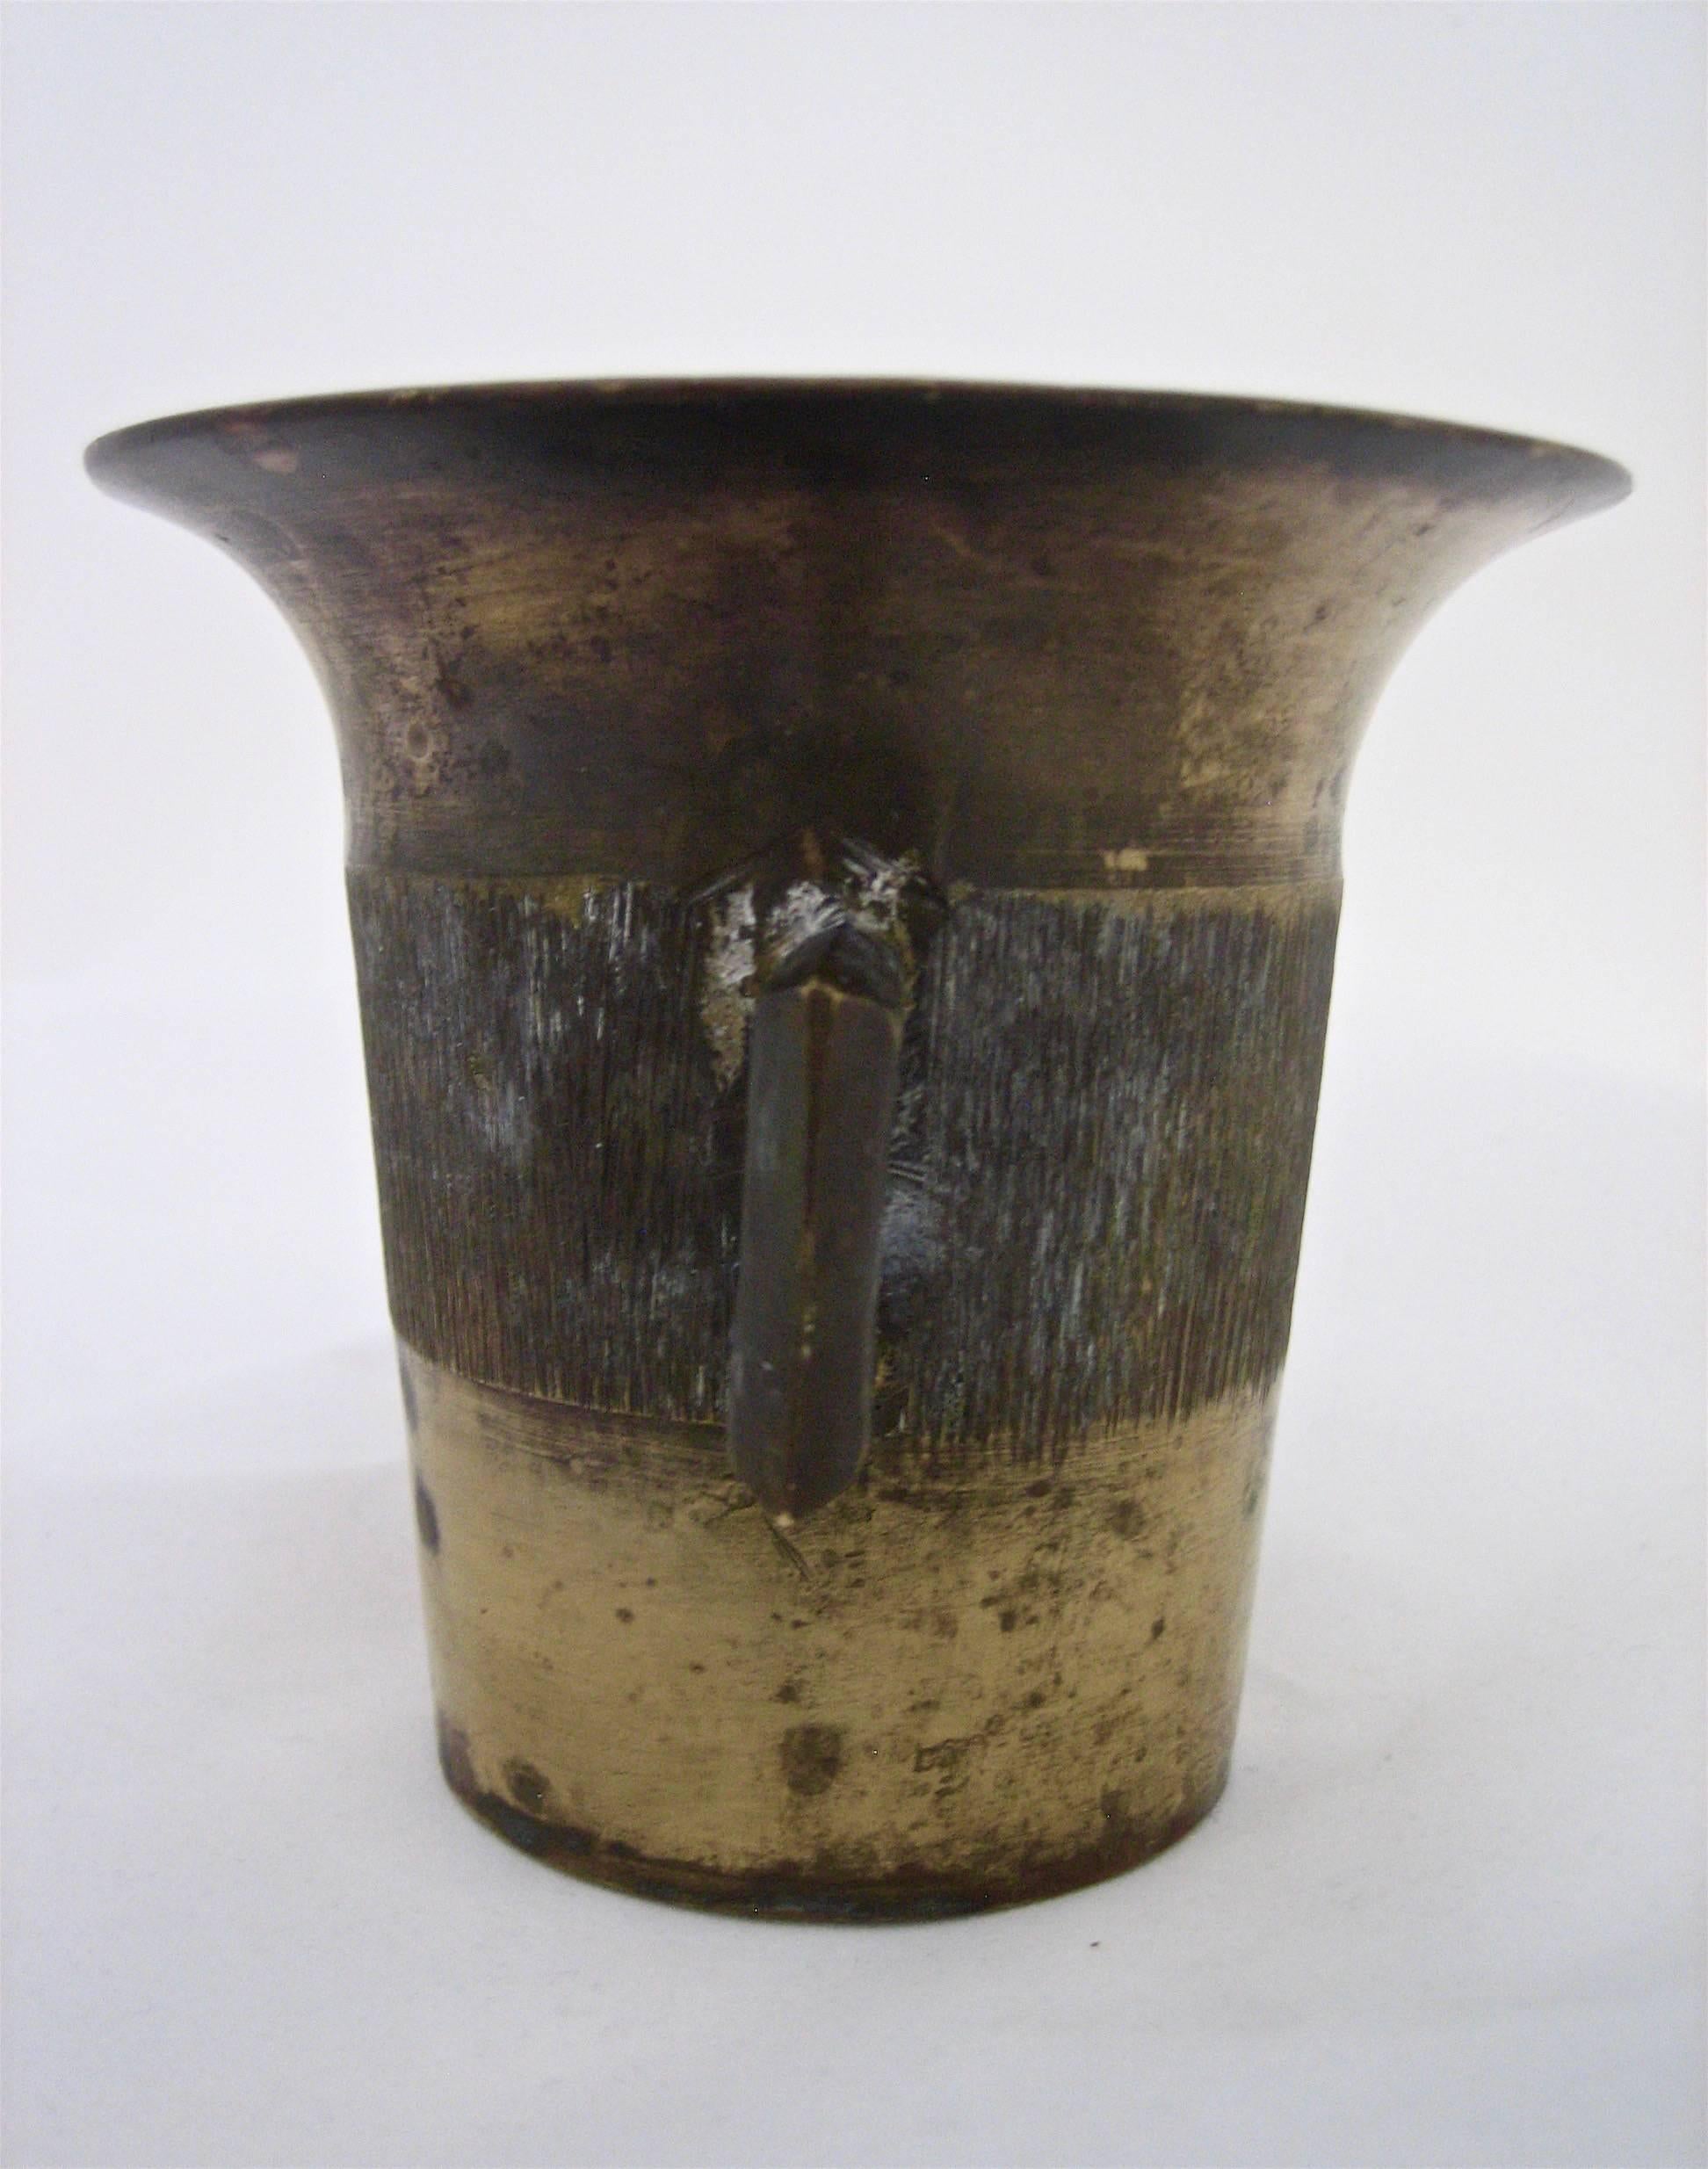 Hand-Crafted Vintage Trench Art Brass Mortar Vessel